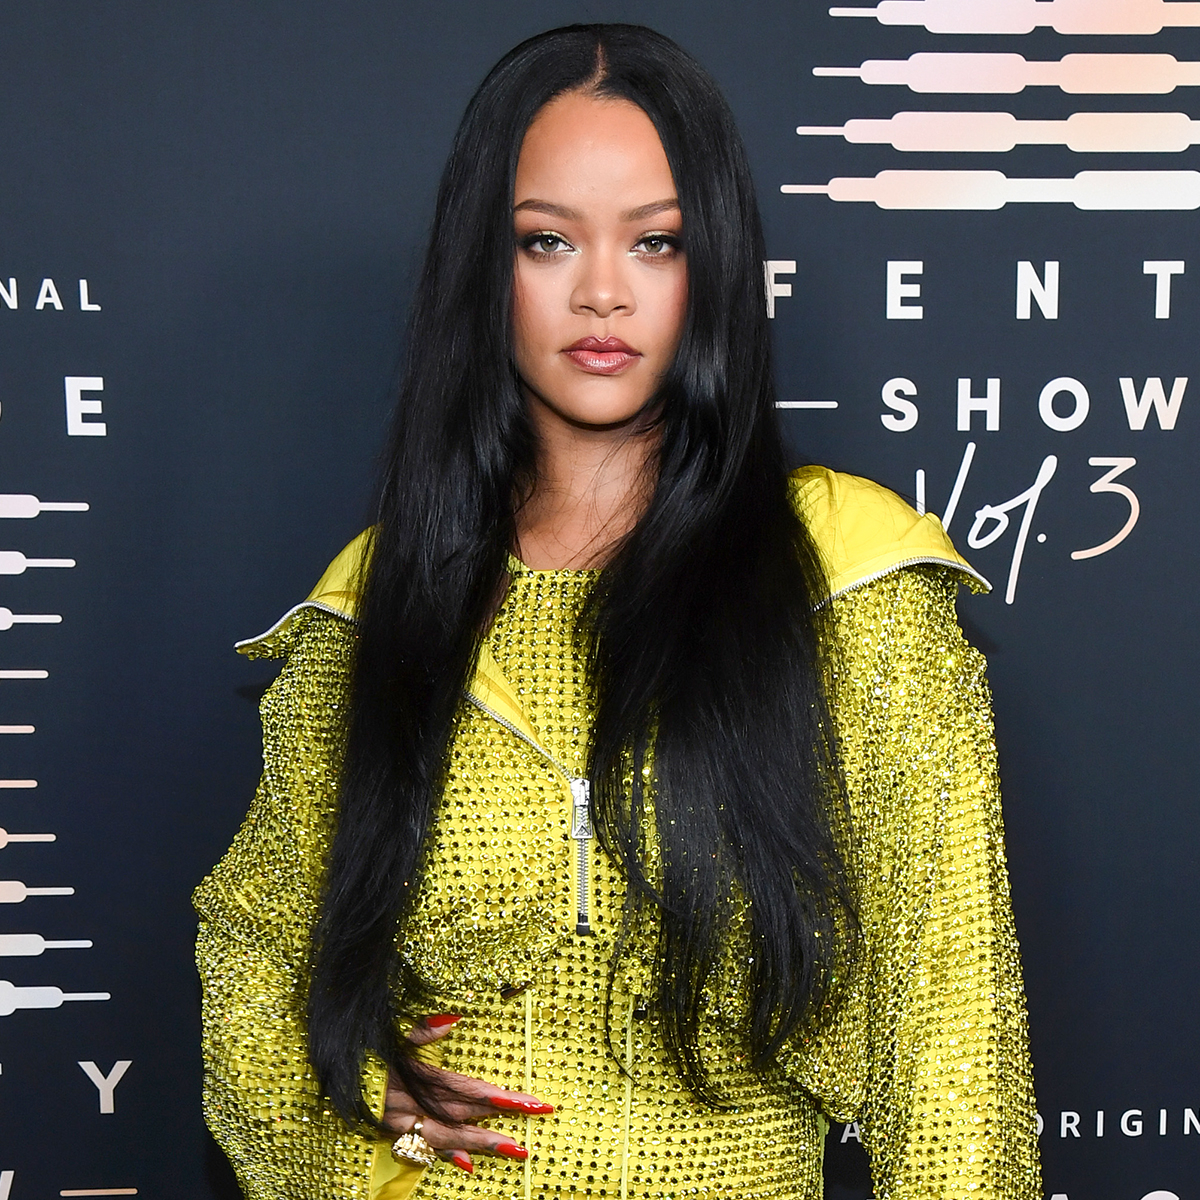 Pregnant Rihanna Wears Vintage Chanel During Dinner Outing In NYC